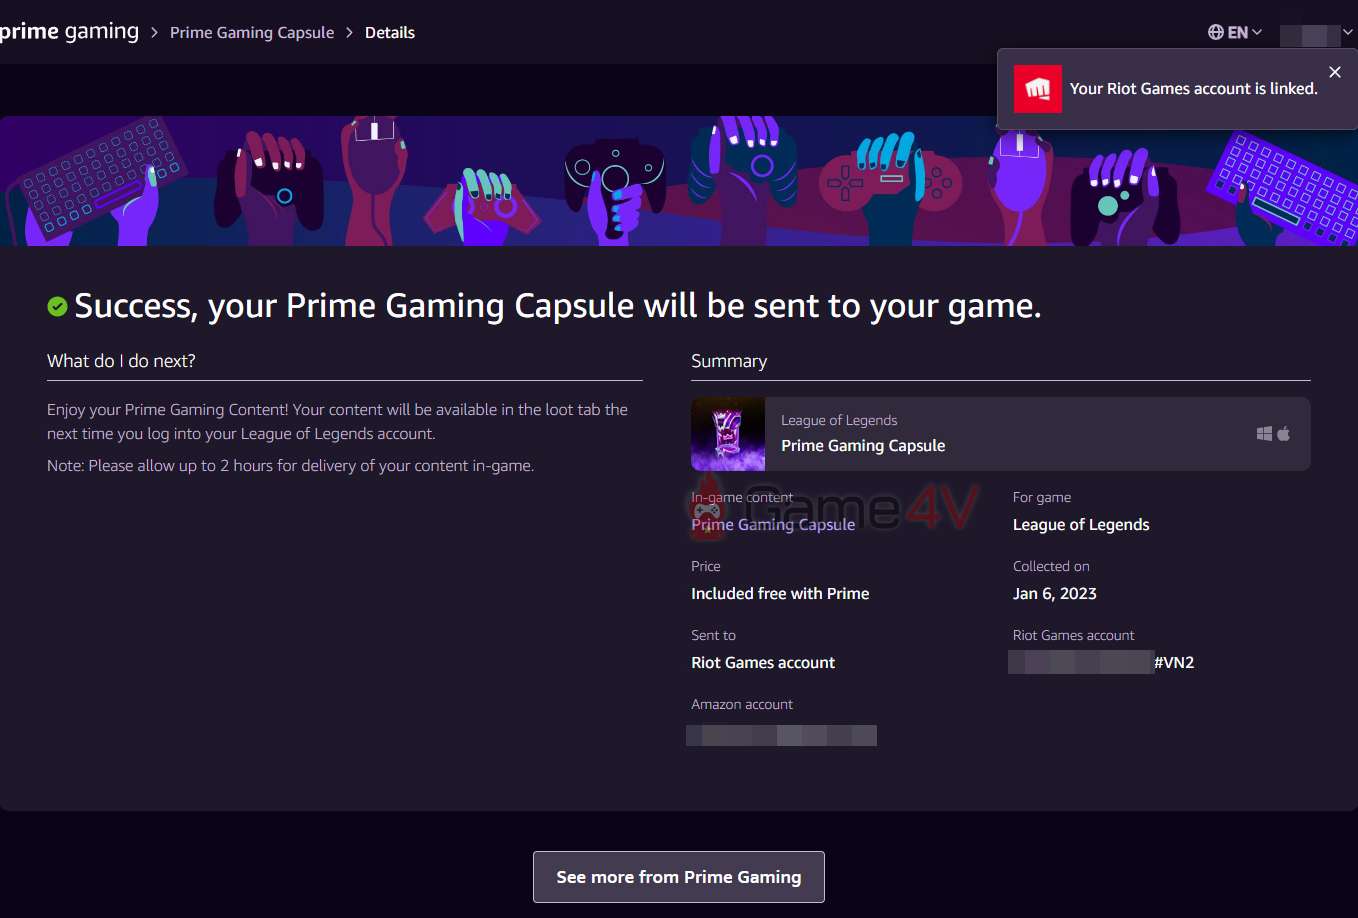 The screen informs that the Prime Gaming Box has been successfully received.